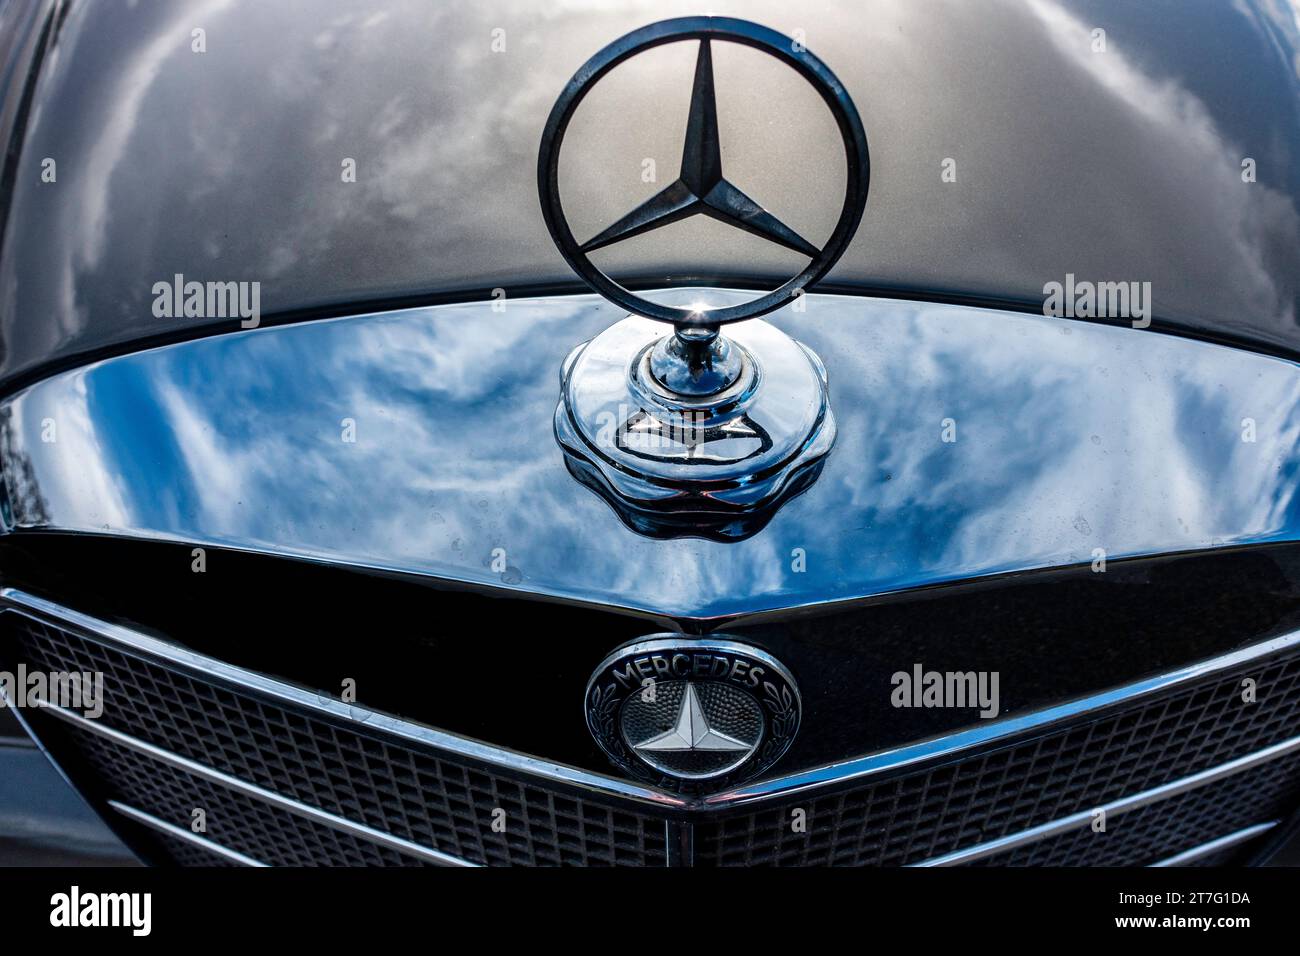 Close-up of a vintage Merceds car's hood, emblem, and grill. Stock Photo